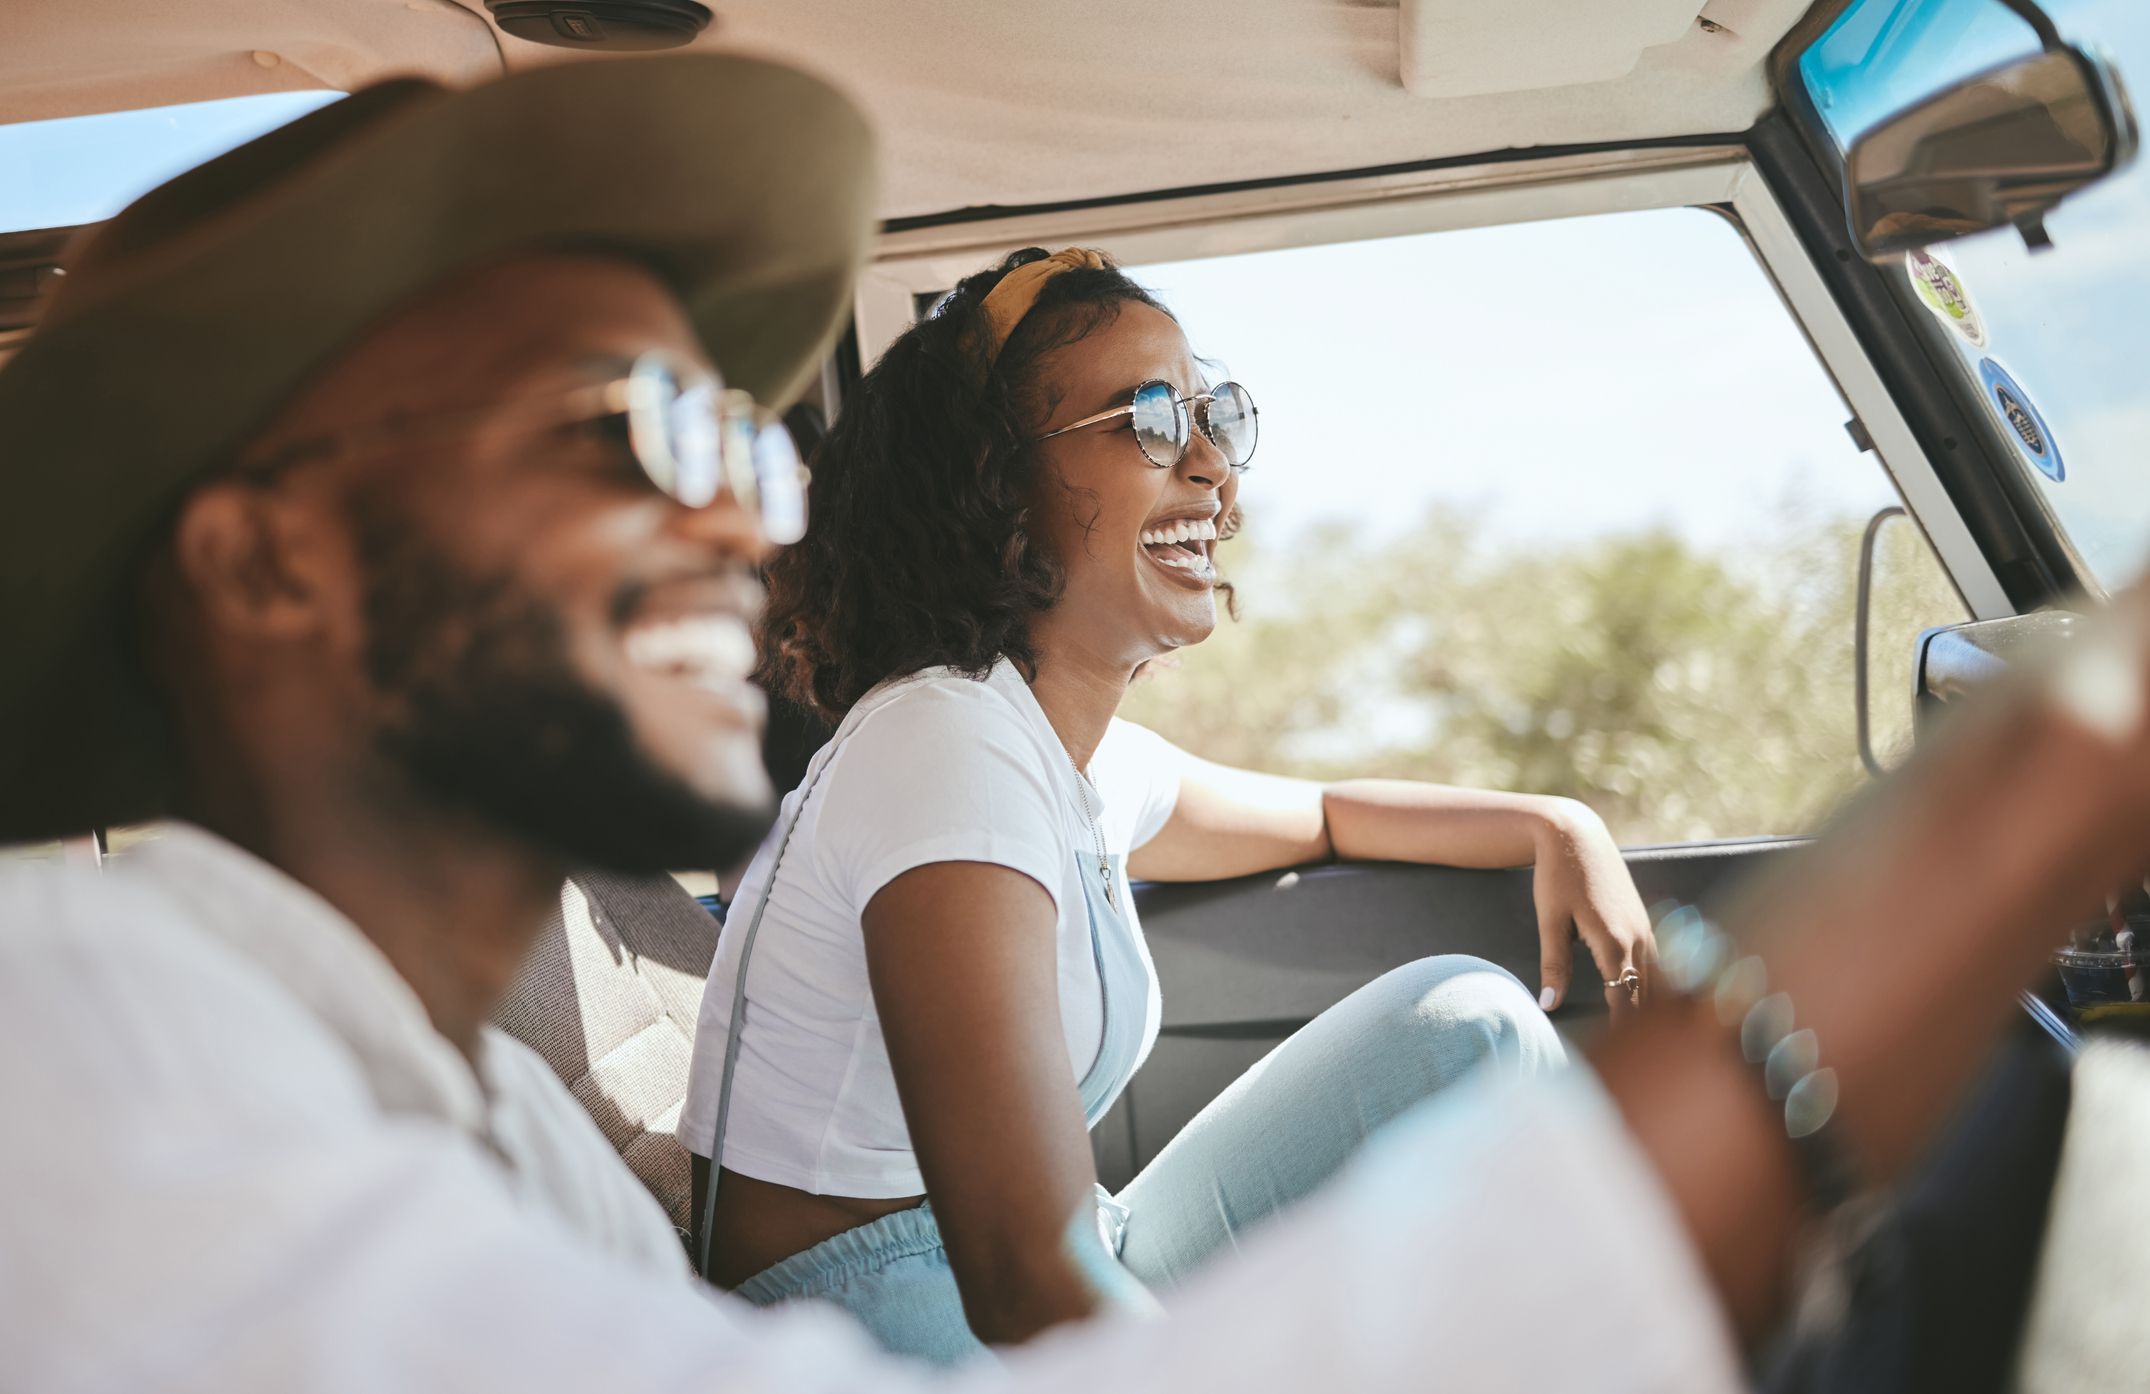 <p>If you're planning a road trip this summer, you won't be alone. Many people will be <a href="https://www.nbcnews.com/business/travel/summer-travel-flights-costs-saving-money-rcna81633">driving than flying</a> after the air travel debacles of the past year and the possibility of more meltdowns this year. And while many travelers are familiar with more lengthy road trips such as Route 66 and California's Highway 1, the country is dotted with under-the-radar alternatives that offer plenty of excitement and less mileage. If you're one of the many trippers looking to hit the road for some new discoveries, here are some shorter options. </p>